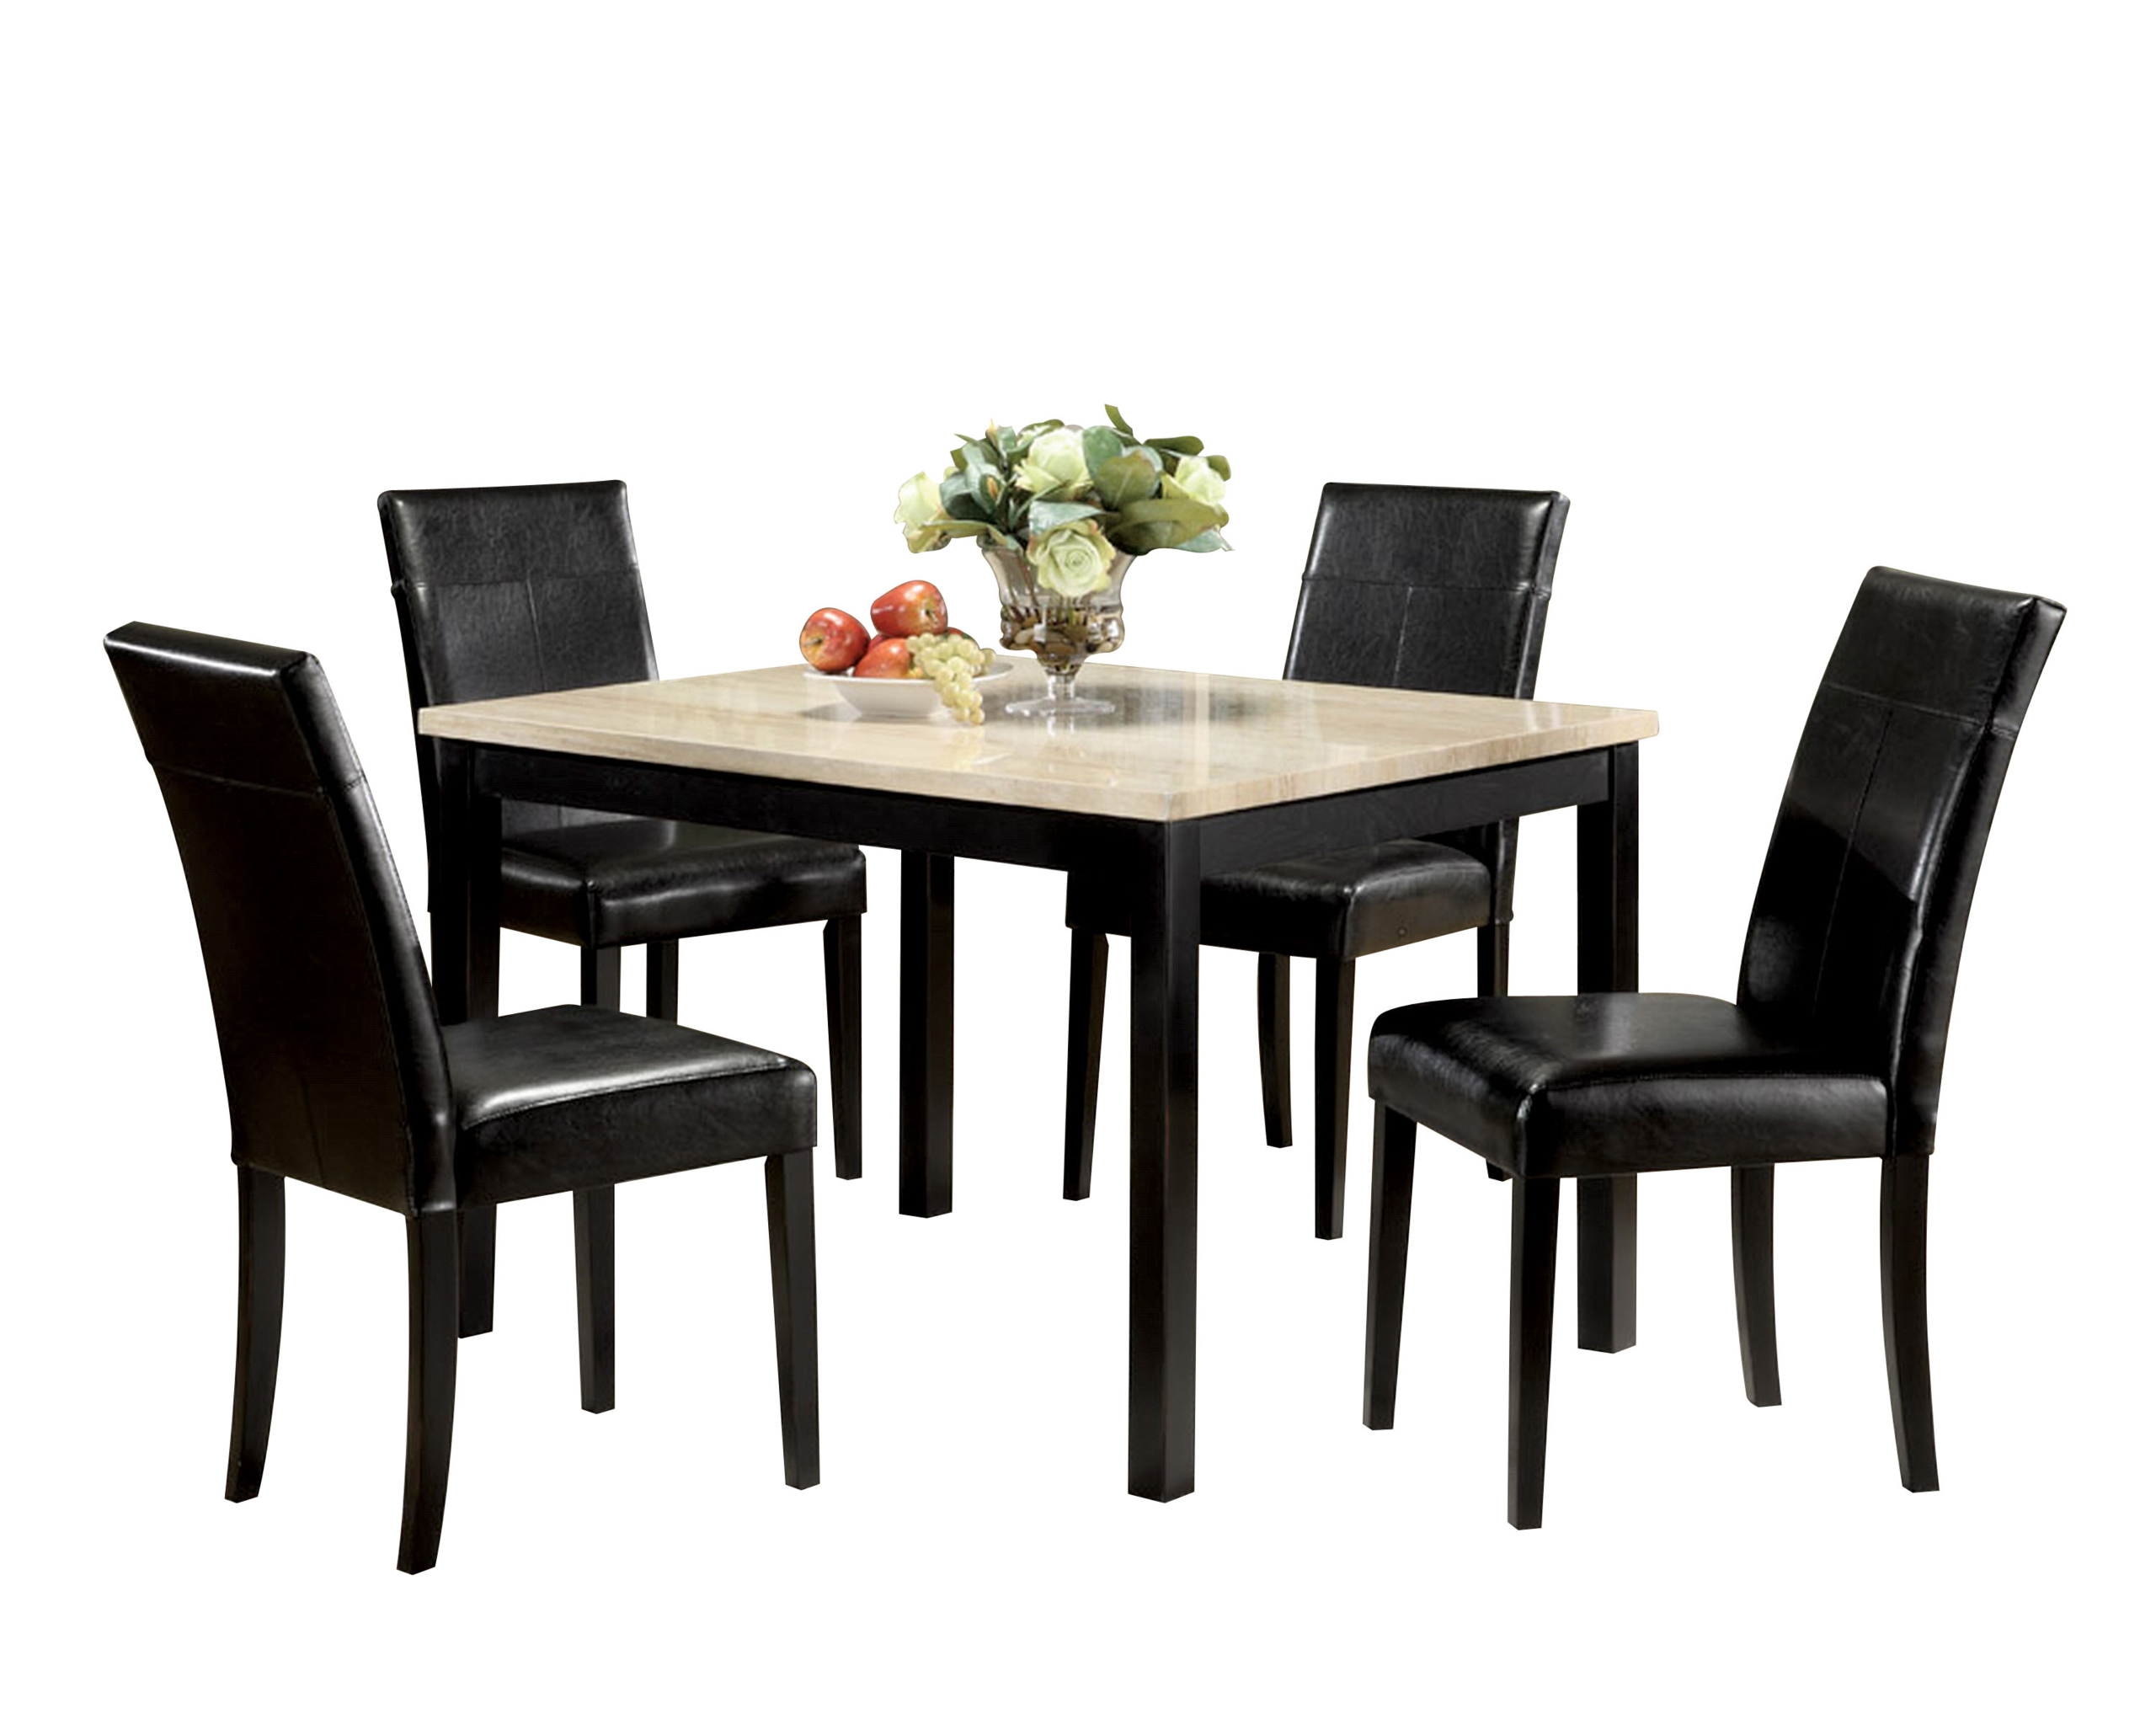 ACME Contemporary Faux Marble Dining Set, White